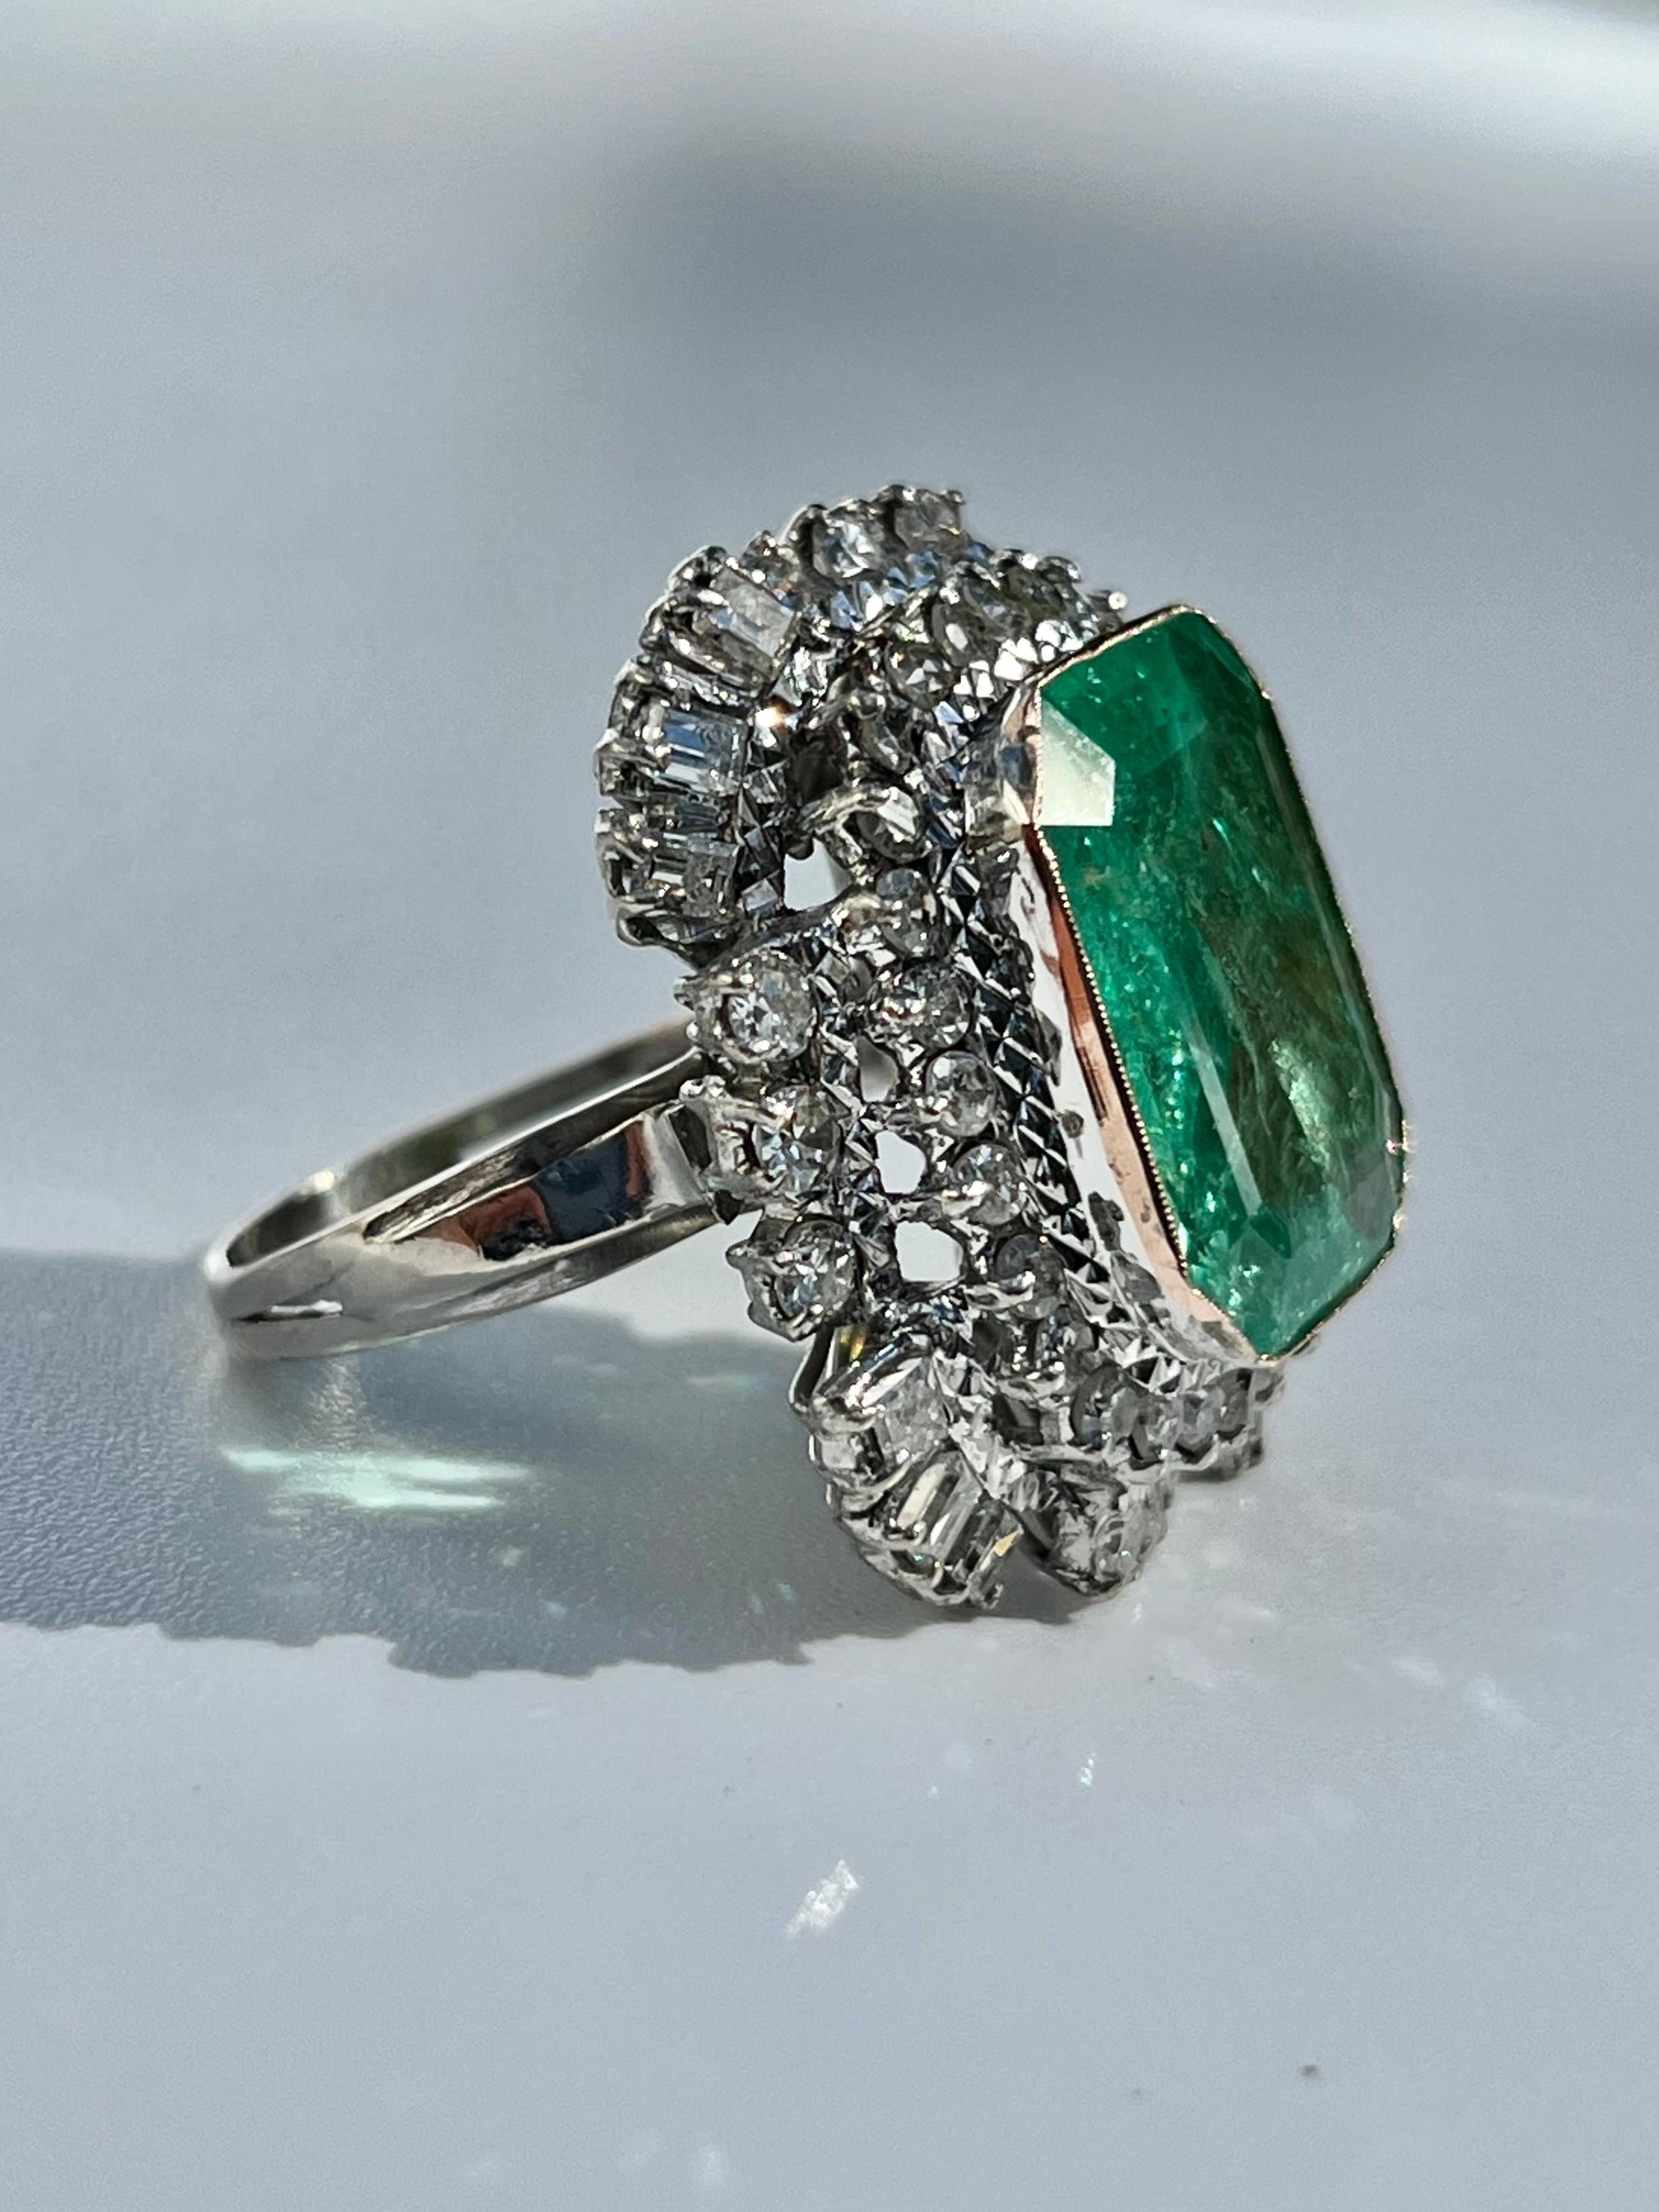 Emerald Cut Vintage 12 Carat Colombian Emerald and Diamond Halo Ring Set in Palladium For Sale